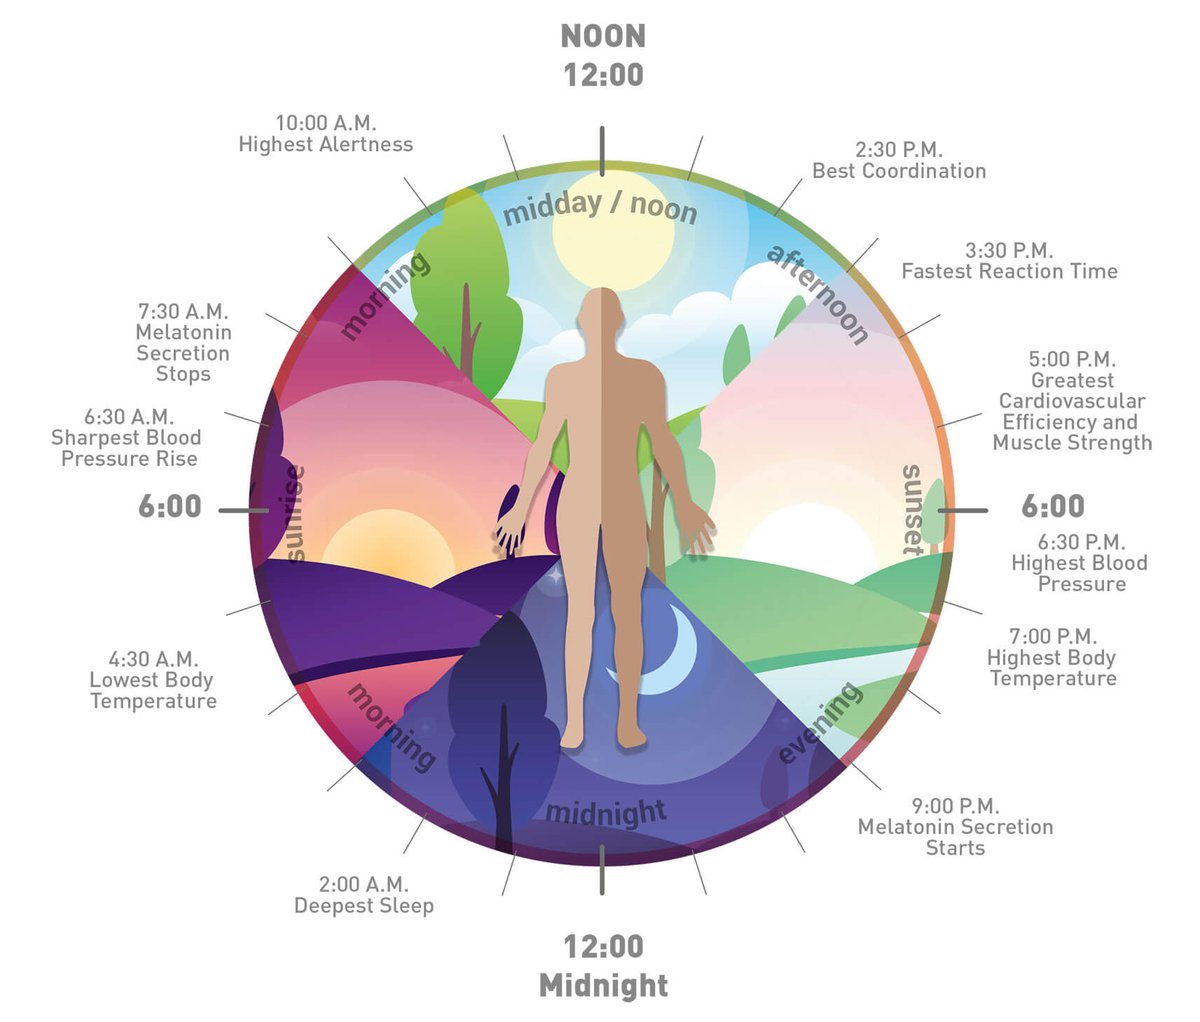 Your Circadian Rhythm (CR) is your body’s 24-hour rhythm controlled by an internal clock.Circa - approximately. Die - day. Circadian.Your CR responds to light changes in your environment and communicates these changes internally to regulate biological functions.